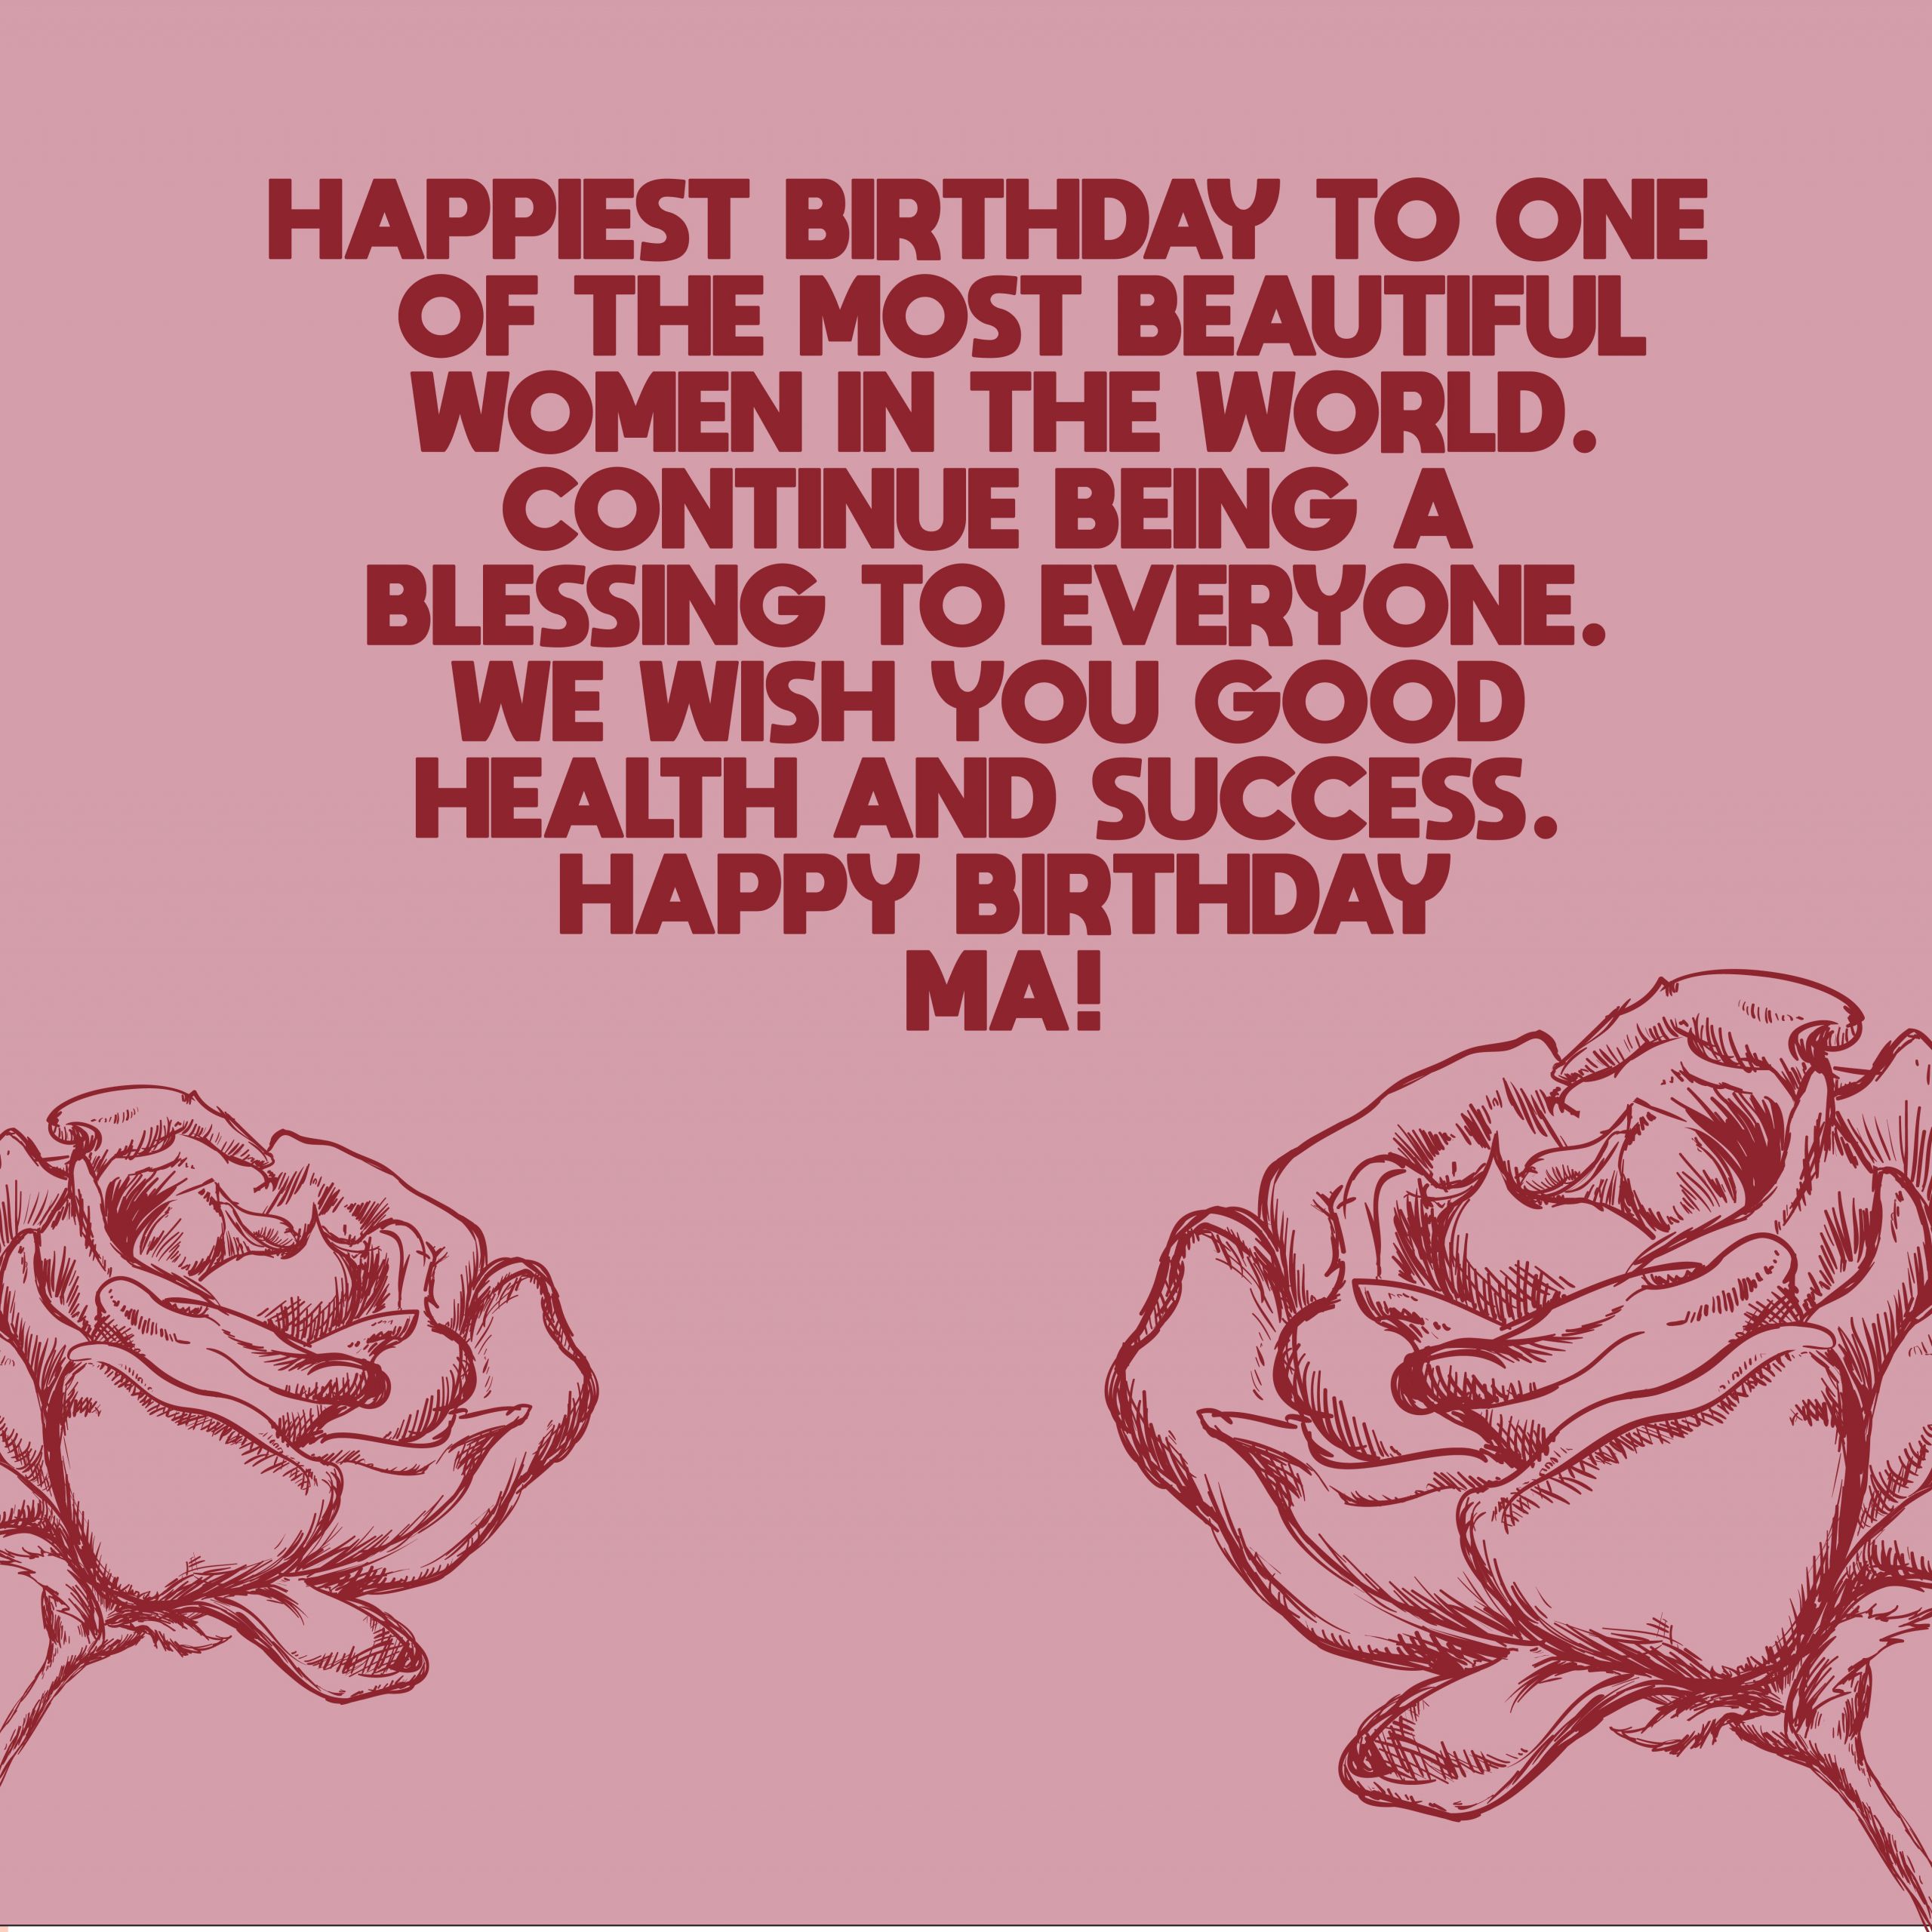 Happy Birthday Wishes For Mother In Law
 The 200 Happy Birthday Mother in Law Quotes – Top Happy